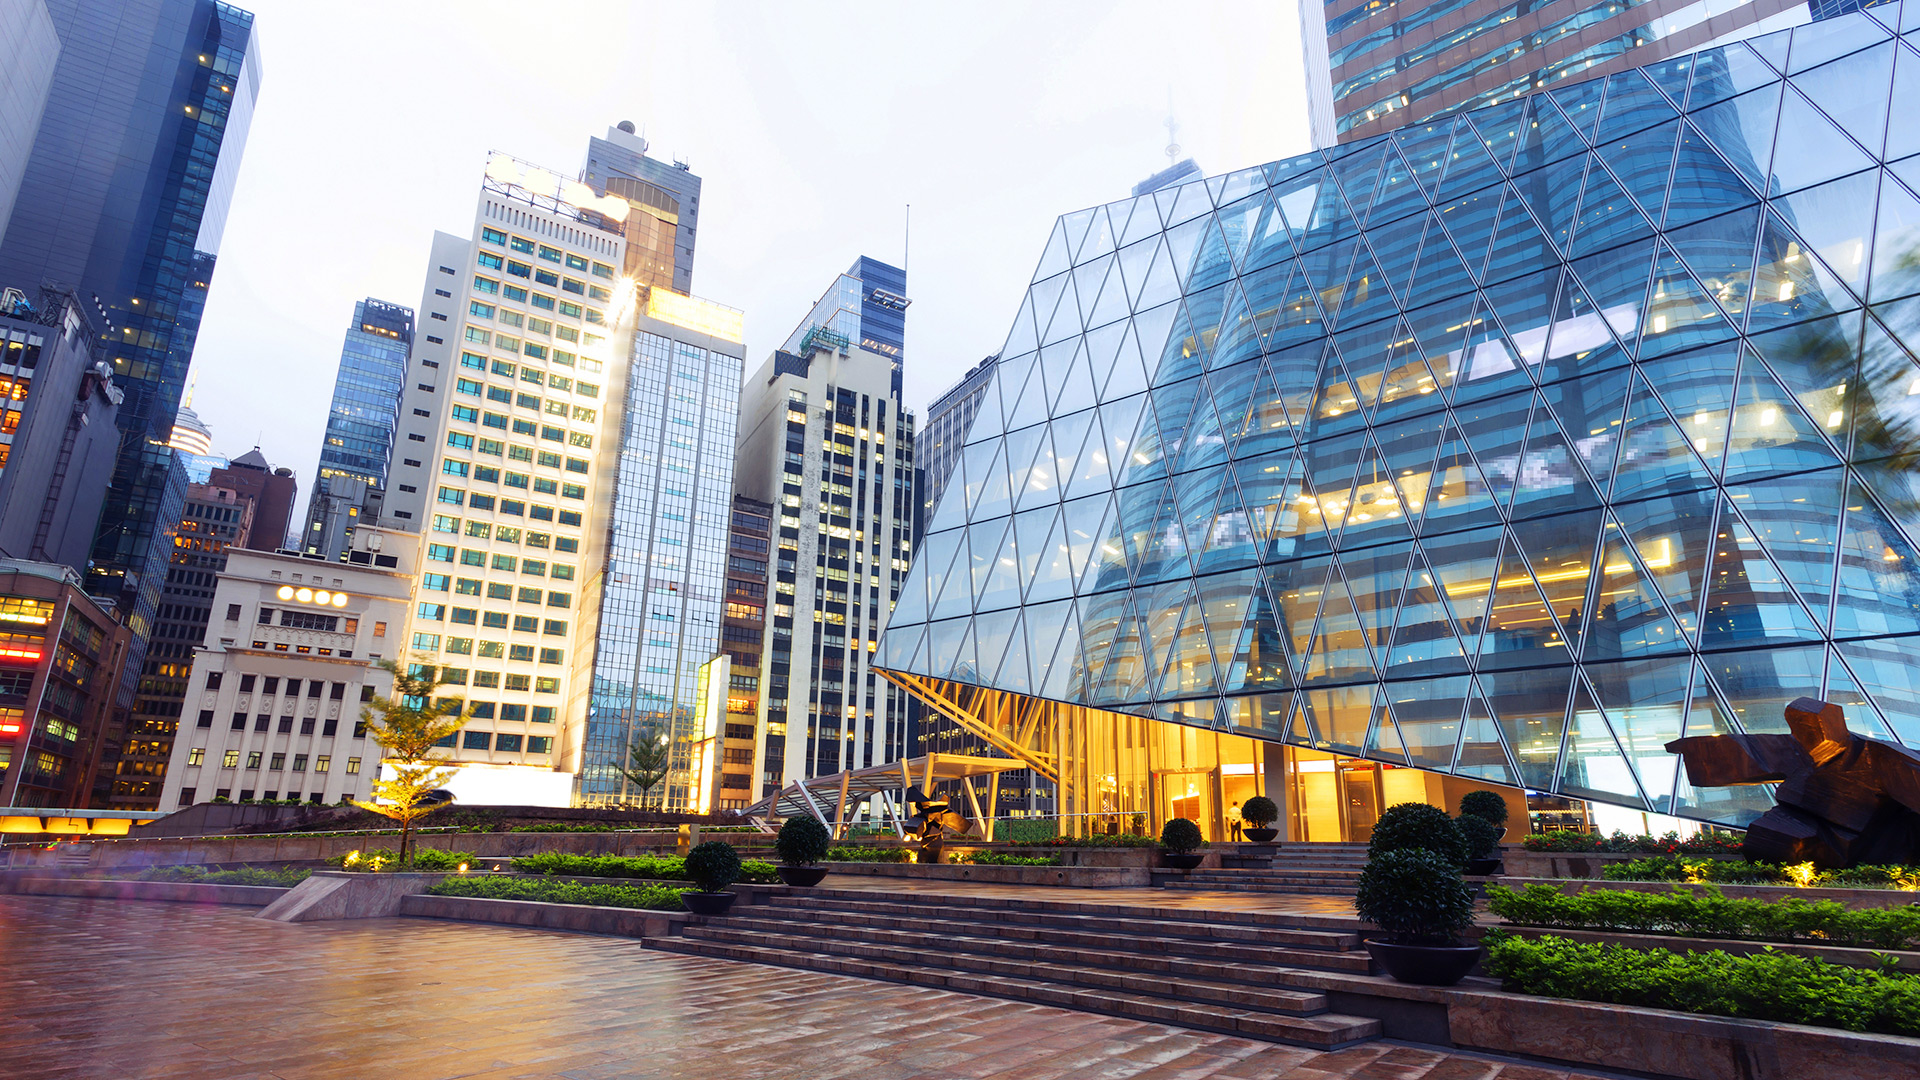 Several office buildings, geometric glass building in the foreground